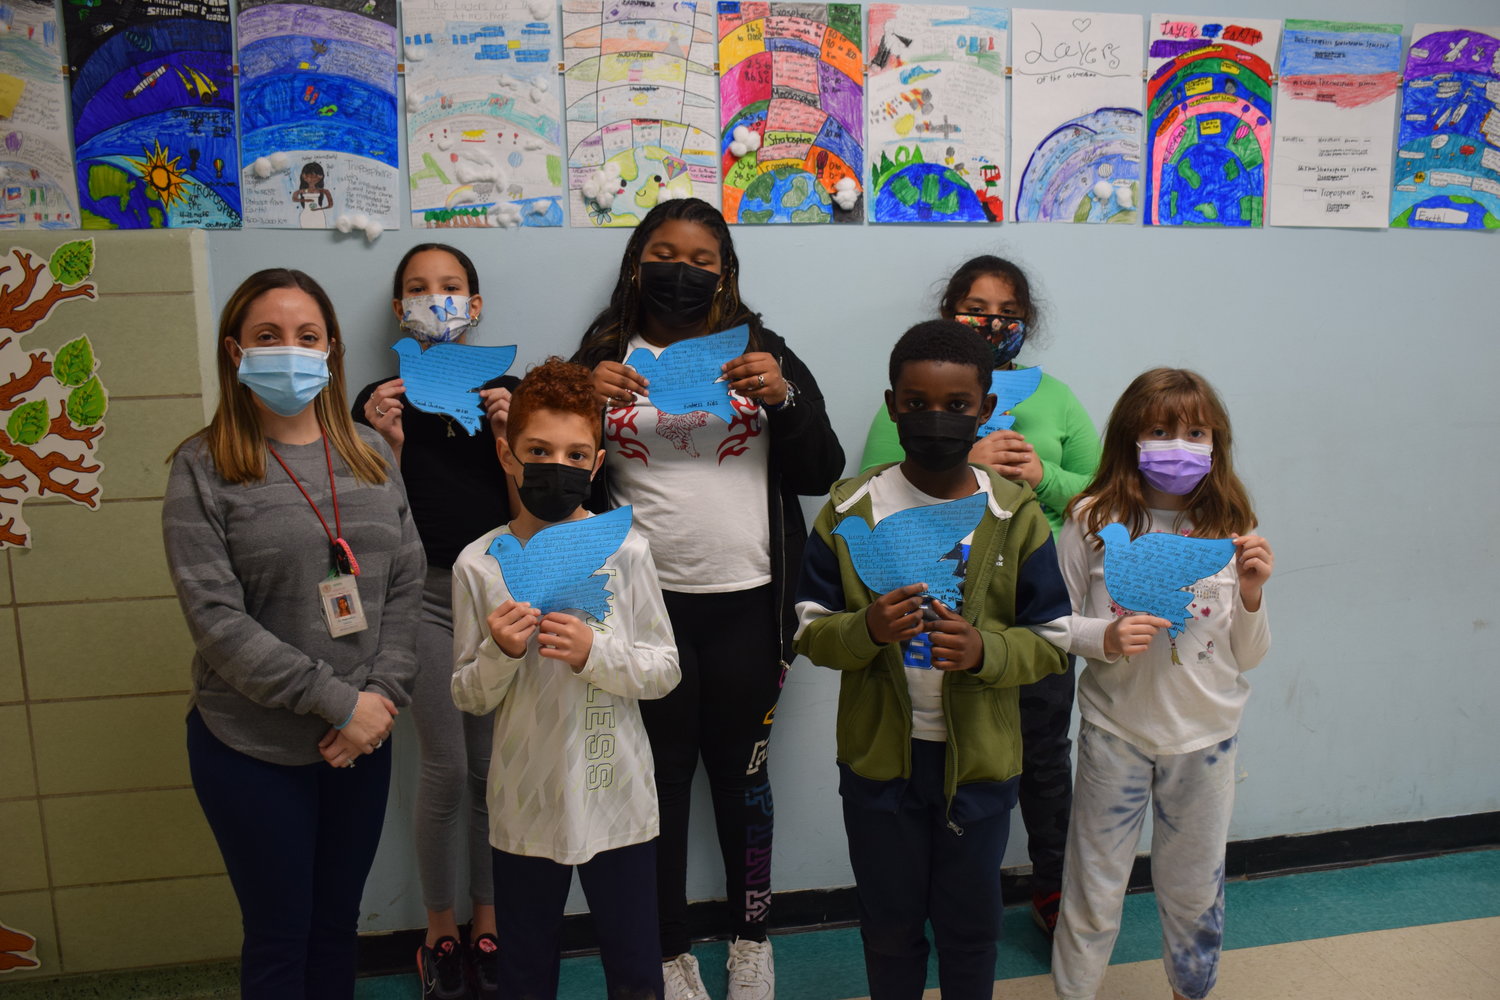 Students from the Caroline G. Atkinson Intermediate School’s Kindness Club completed their first schoolwide project in early February.